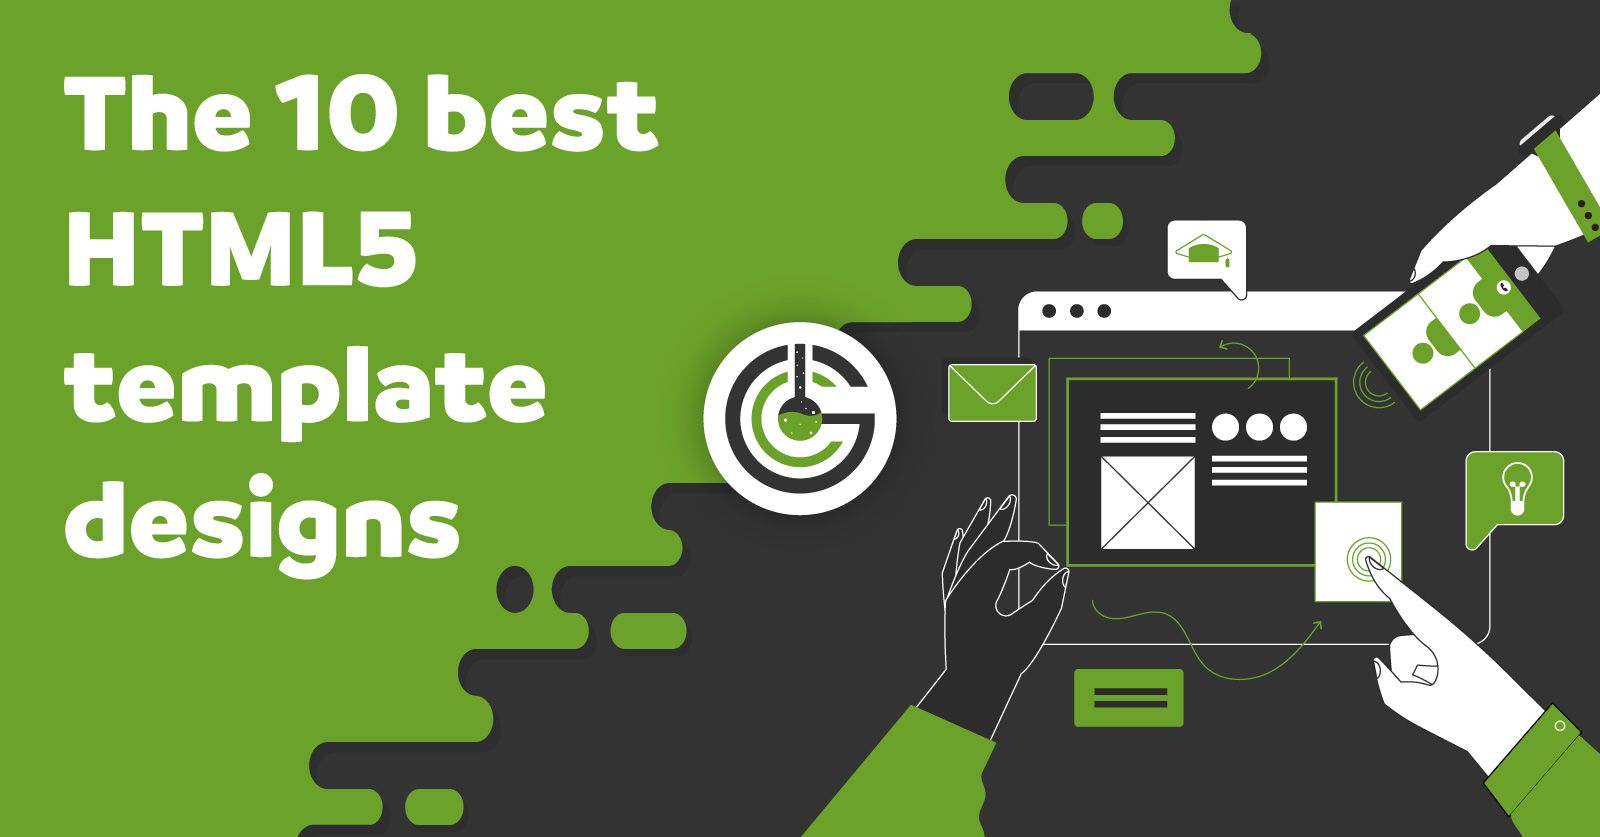 The 10 best HTML5 template designs